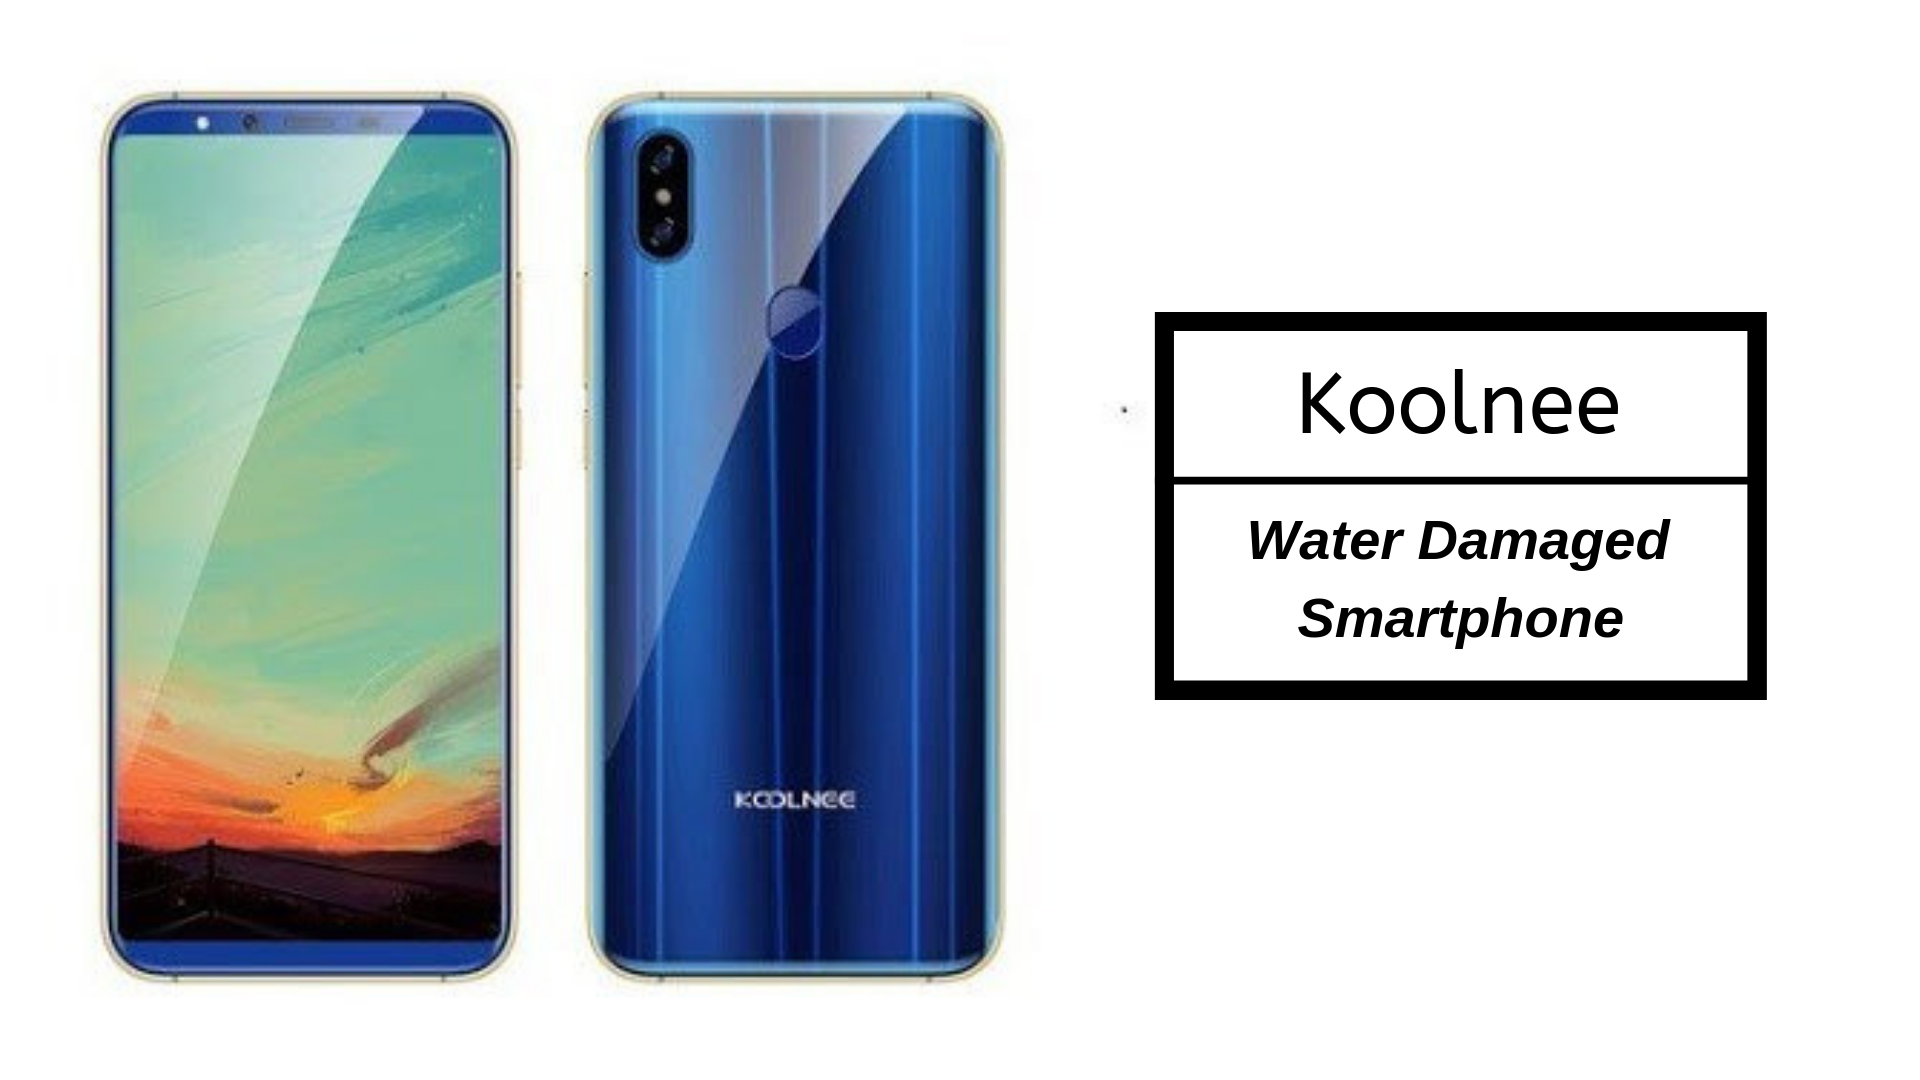 How To Fix Koolnee Water Damaged Smartphone [Quick Guide]